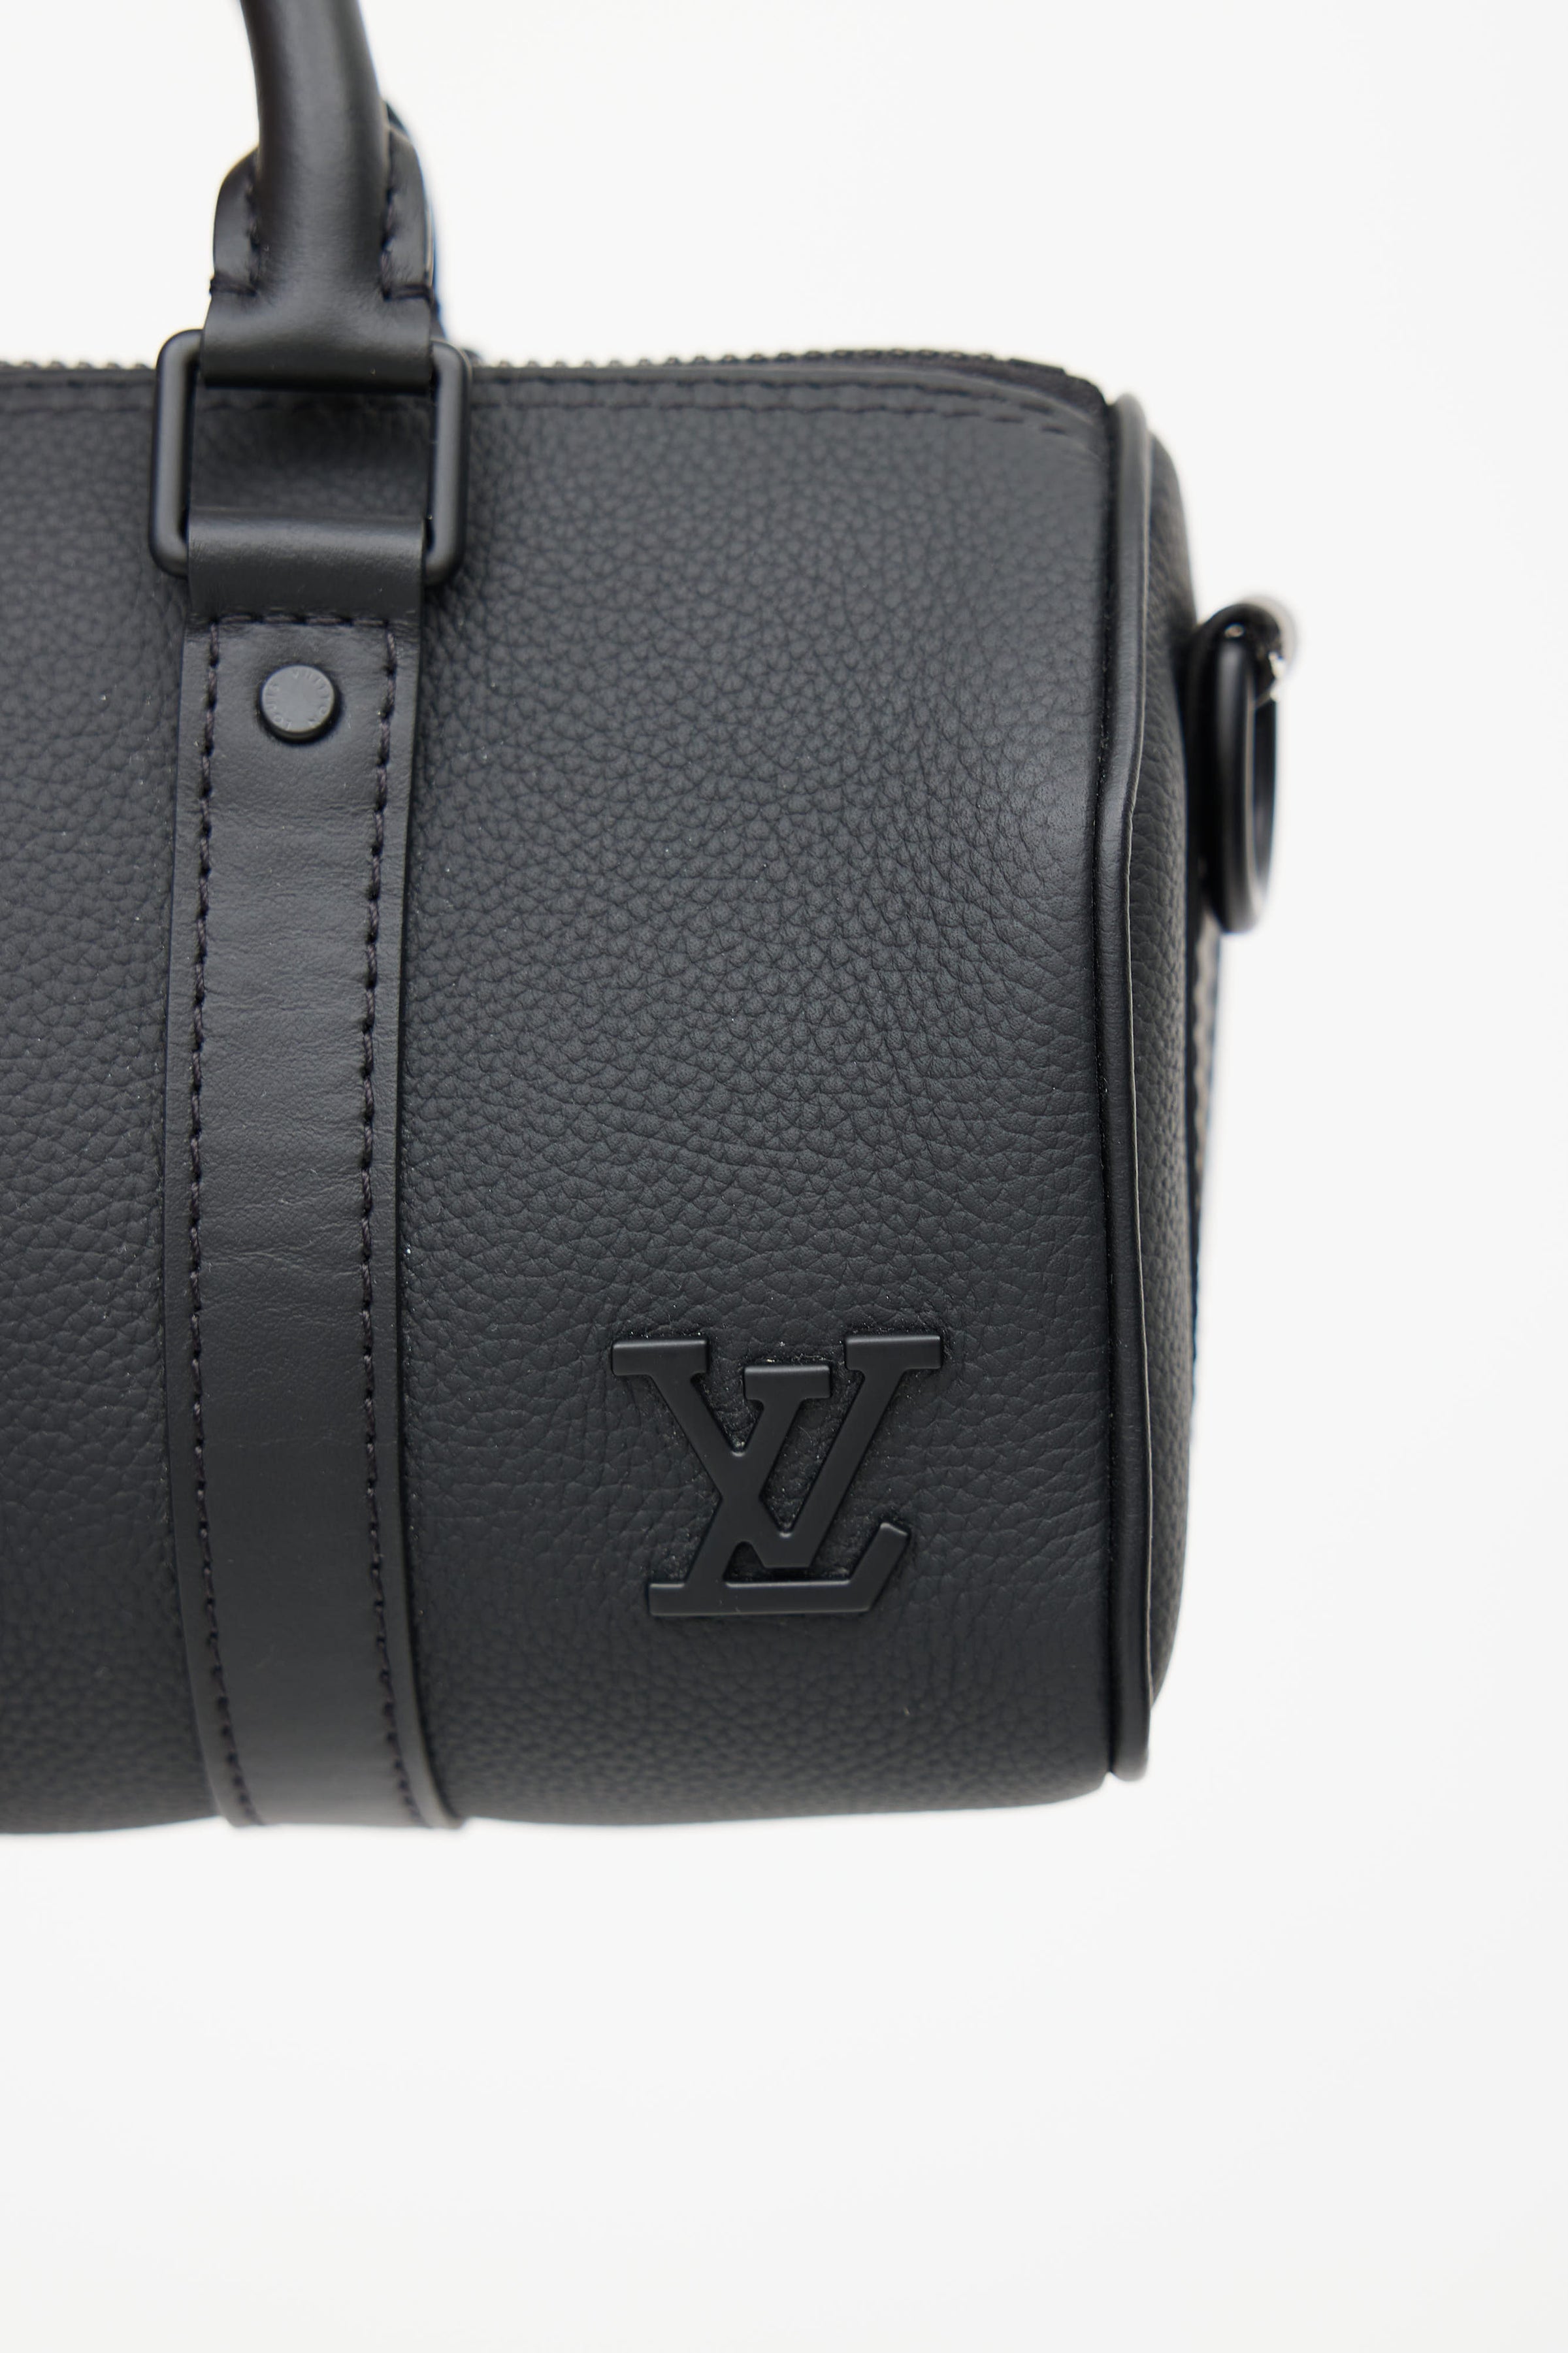 What's in my bag  Louis Vuitton Keepall XS Aerogram Leather 